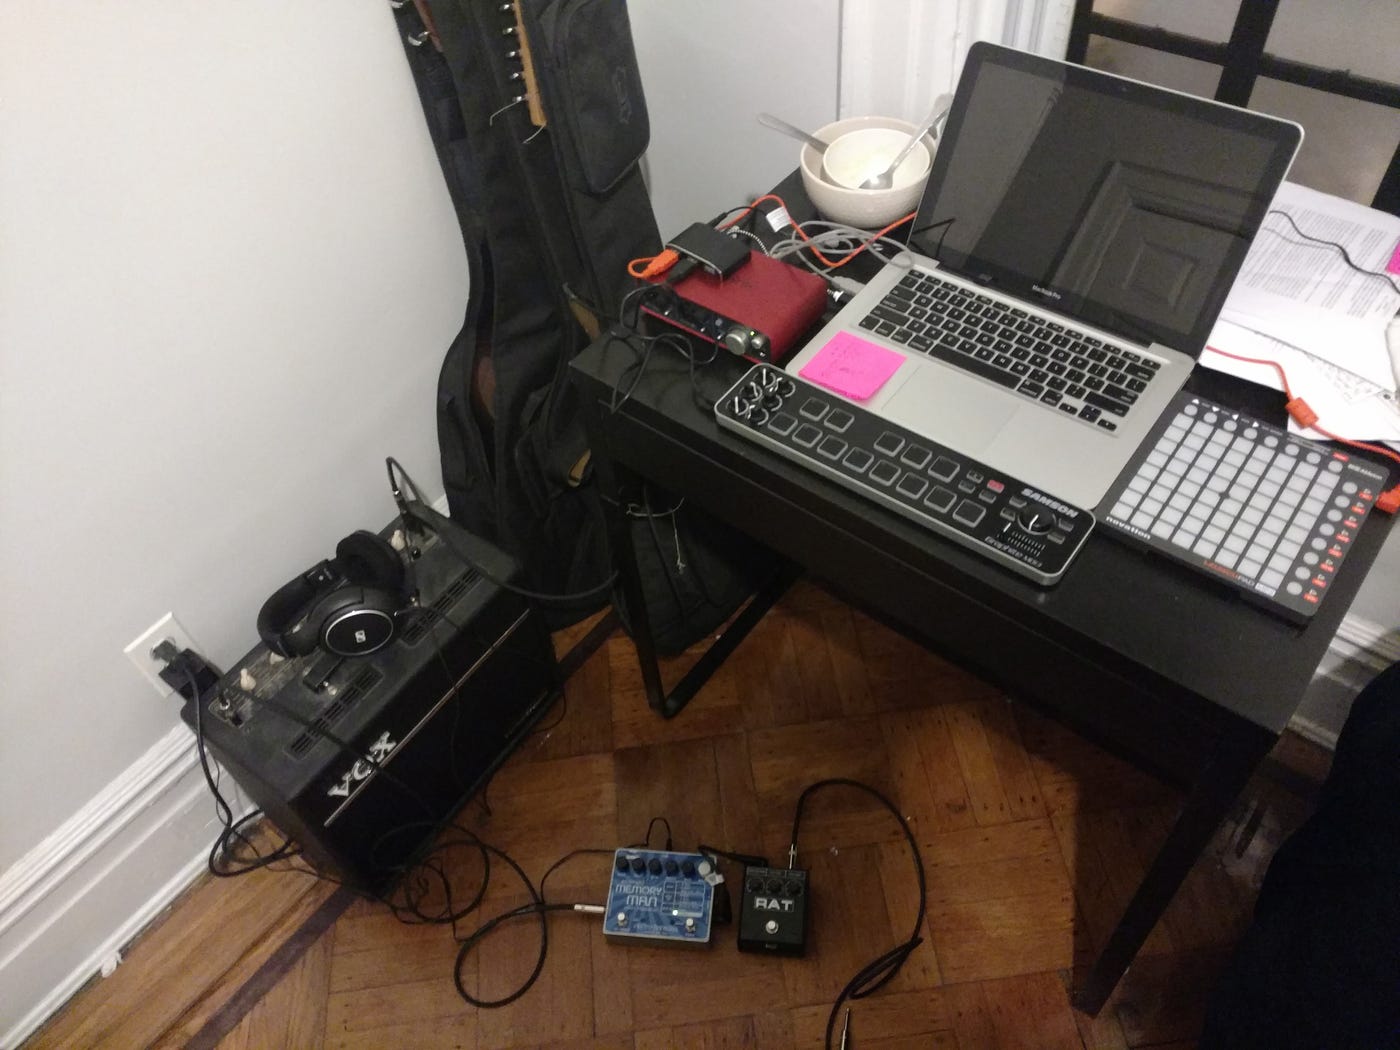 Setup from rehearsals before Source Festival, May 2017. I ended up not using MD13 for the show.